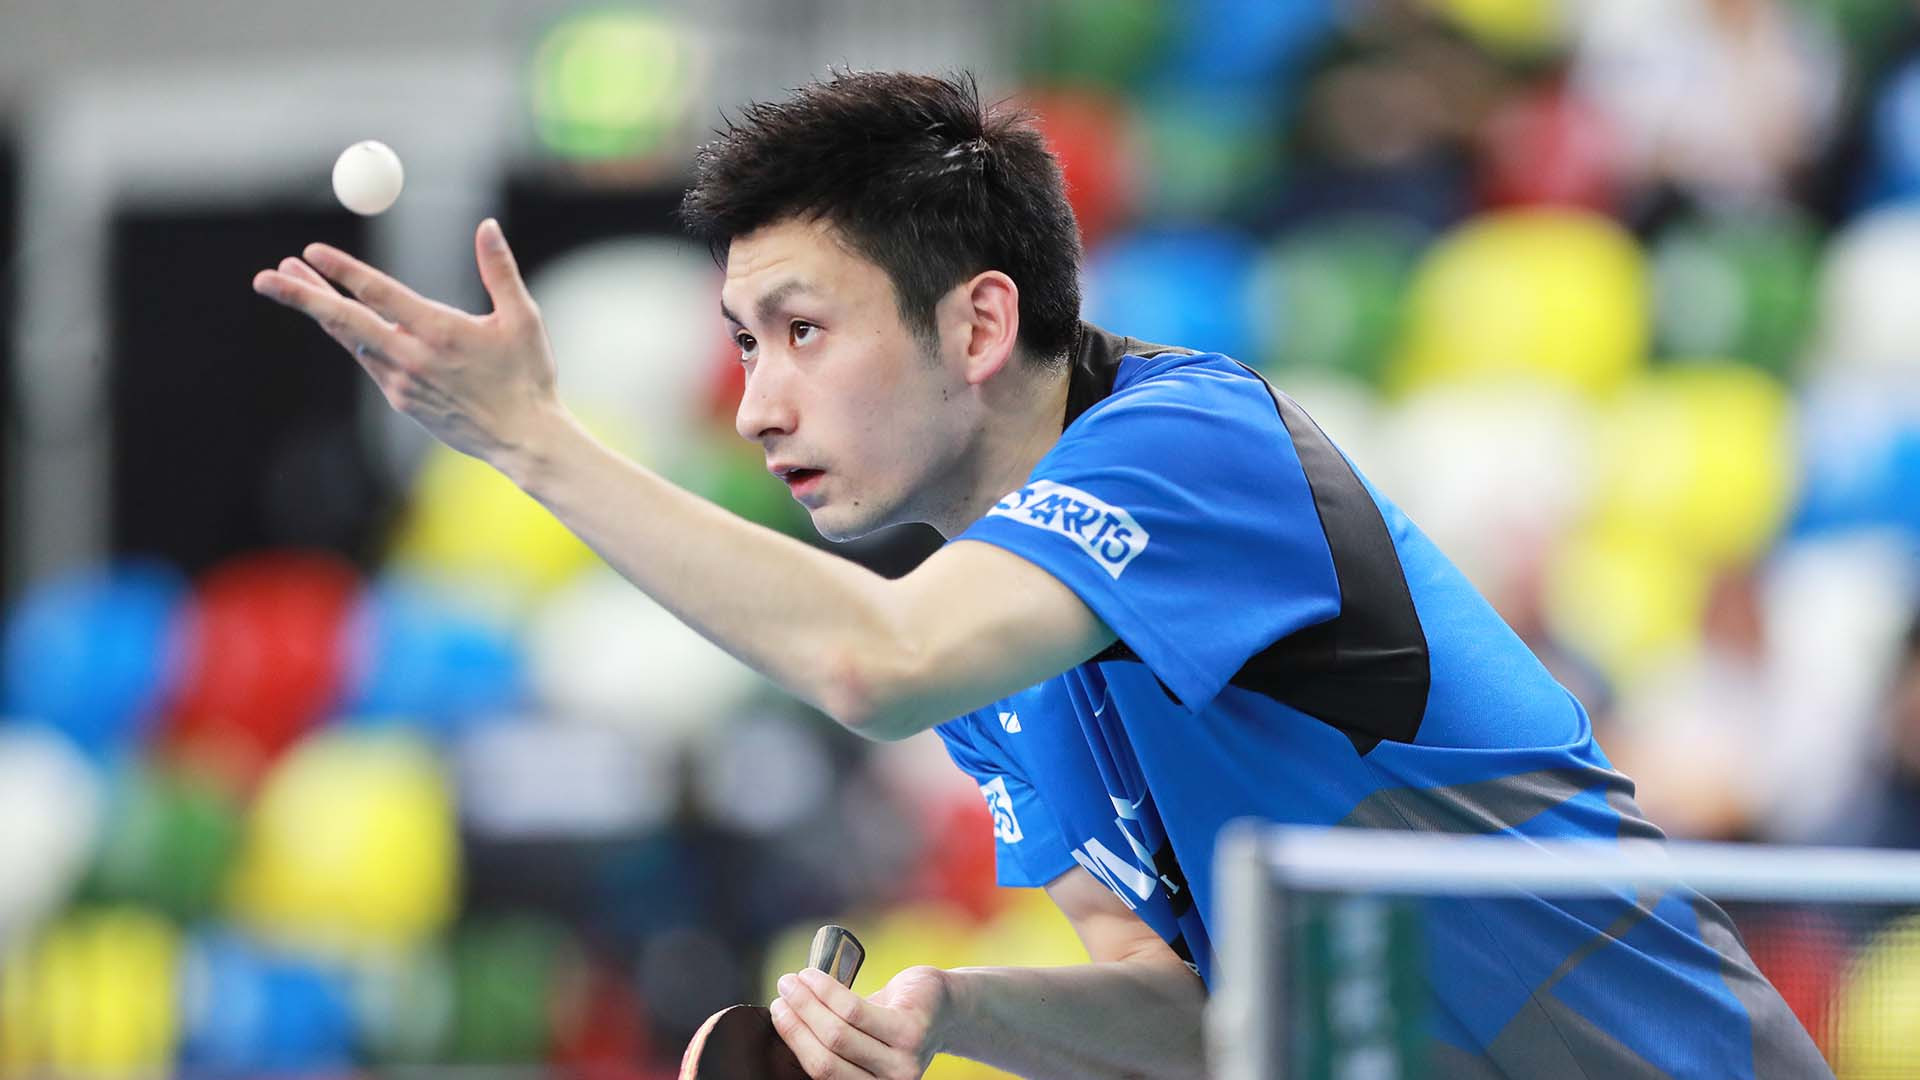 Jin Ueda produced an incredible comeback for Japan as they beat South Korea 3-2 to book a place in the final of the ITTF Team World Cup against China in London ©ITTF